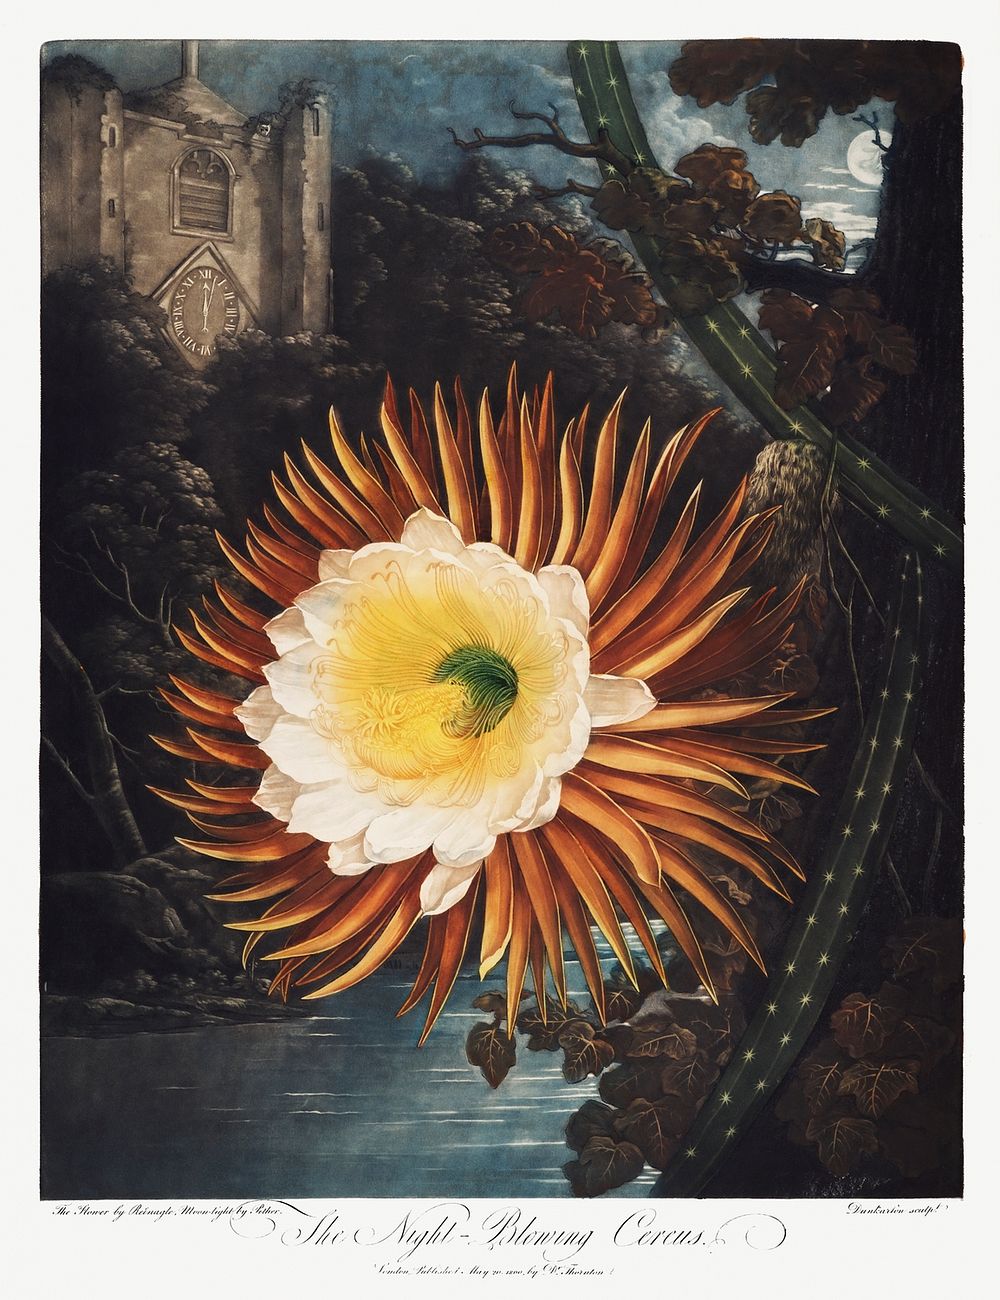 The Night&ndash;Blowing Cereus from The Temple of Flora (1807) by Robert John Thornton. Original from Biodiversity Heritage…